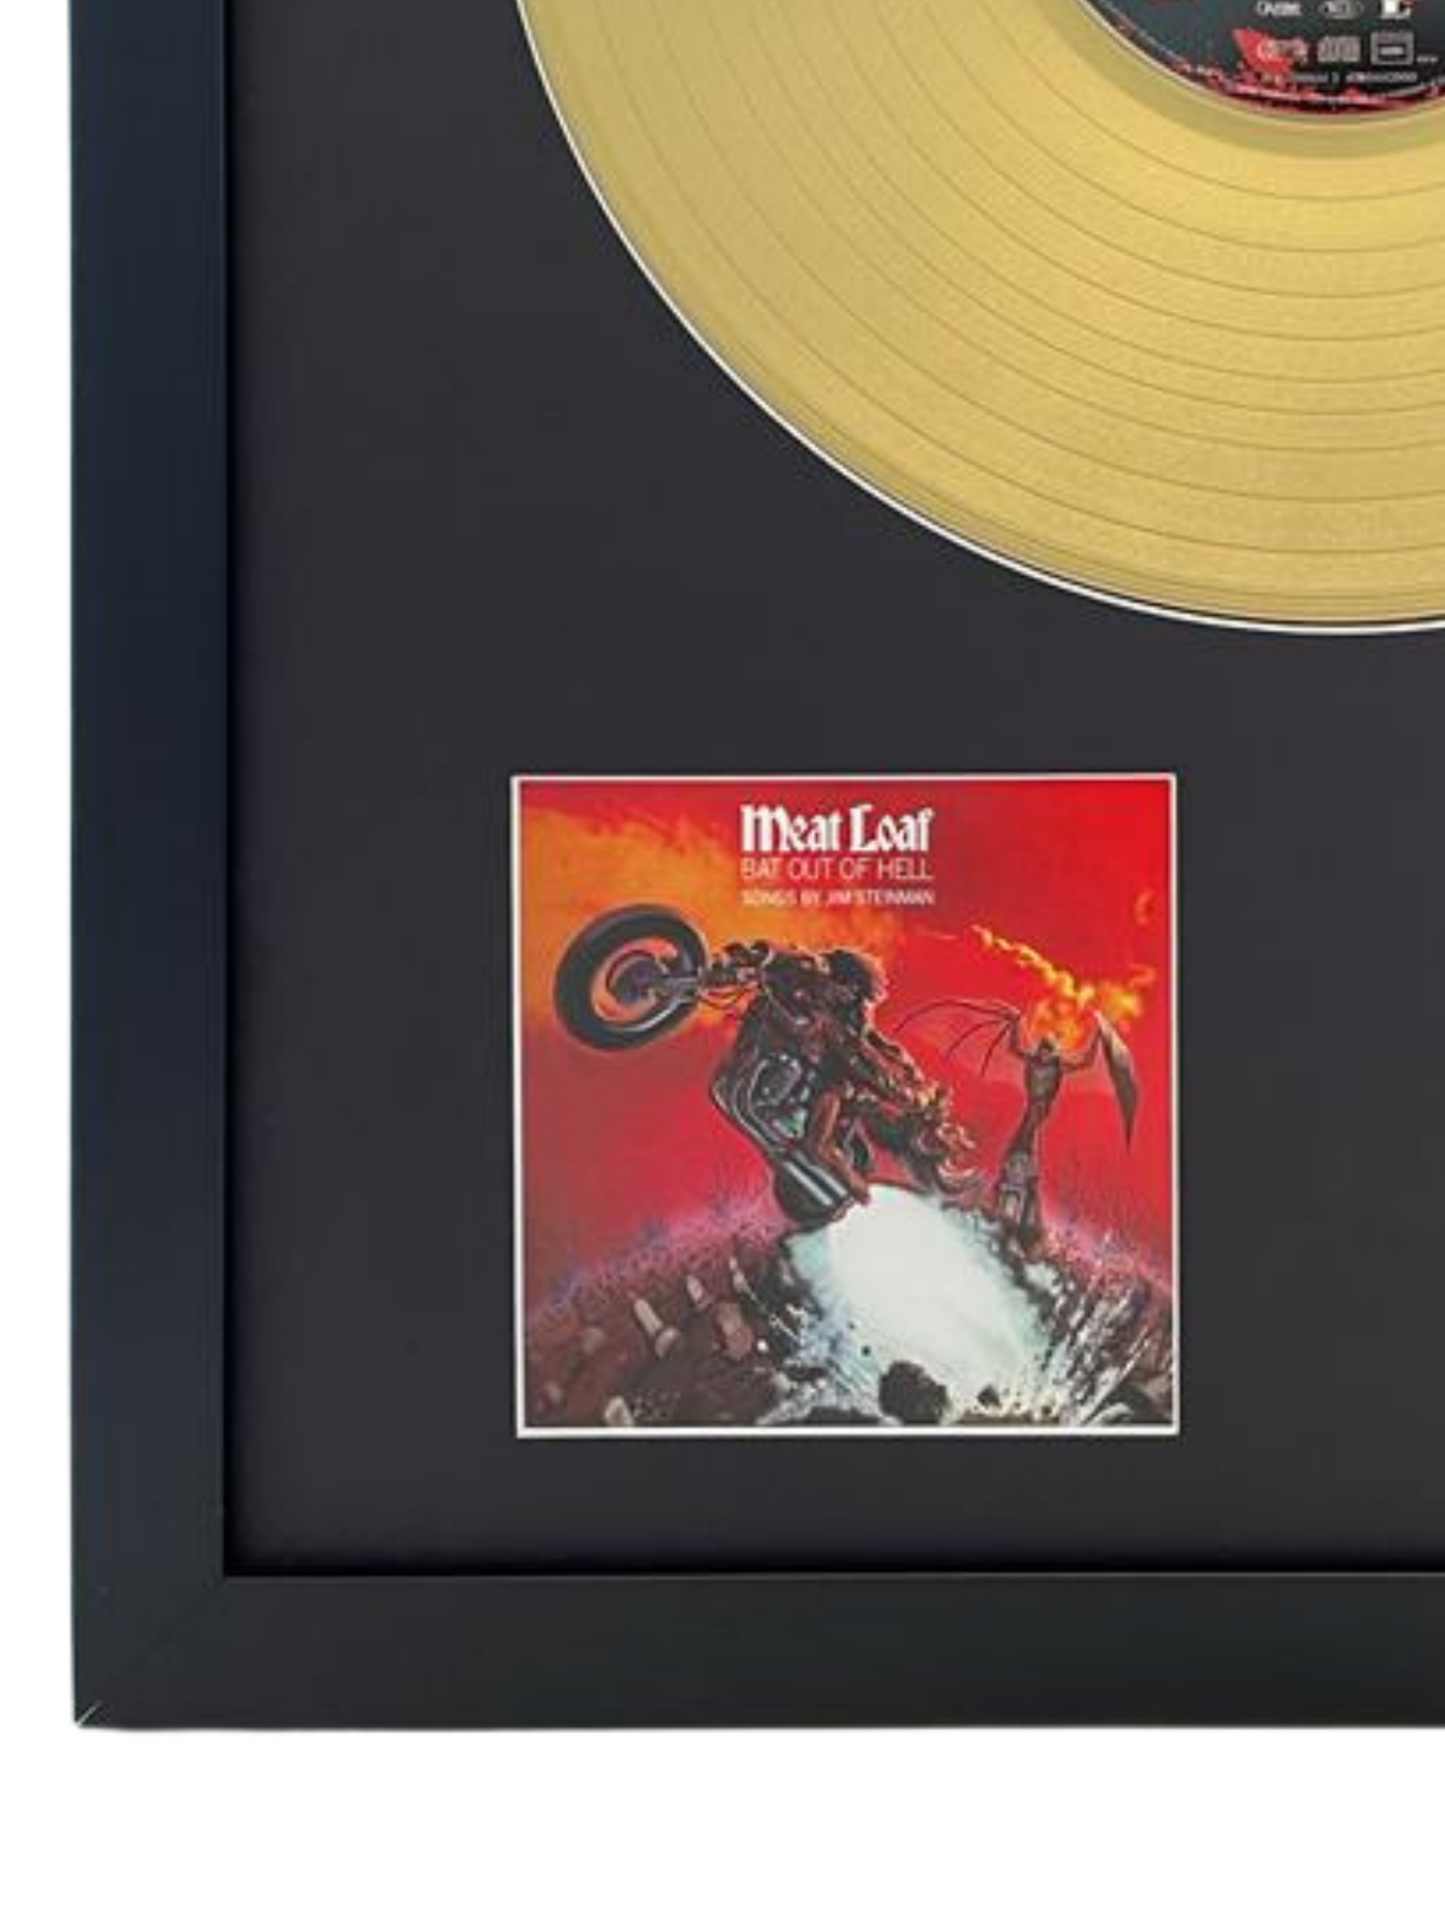 MEAT LOAF - Bat Out Of Hell | Gold Record & CD Presentation